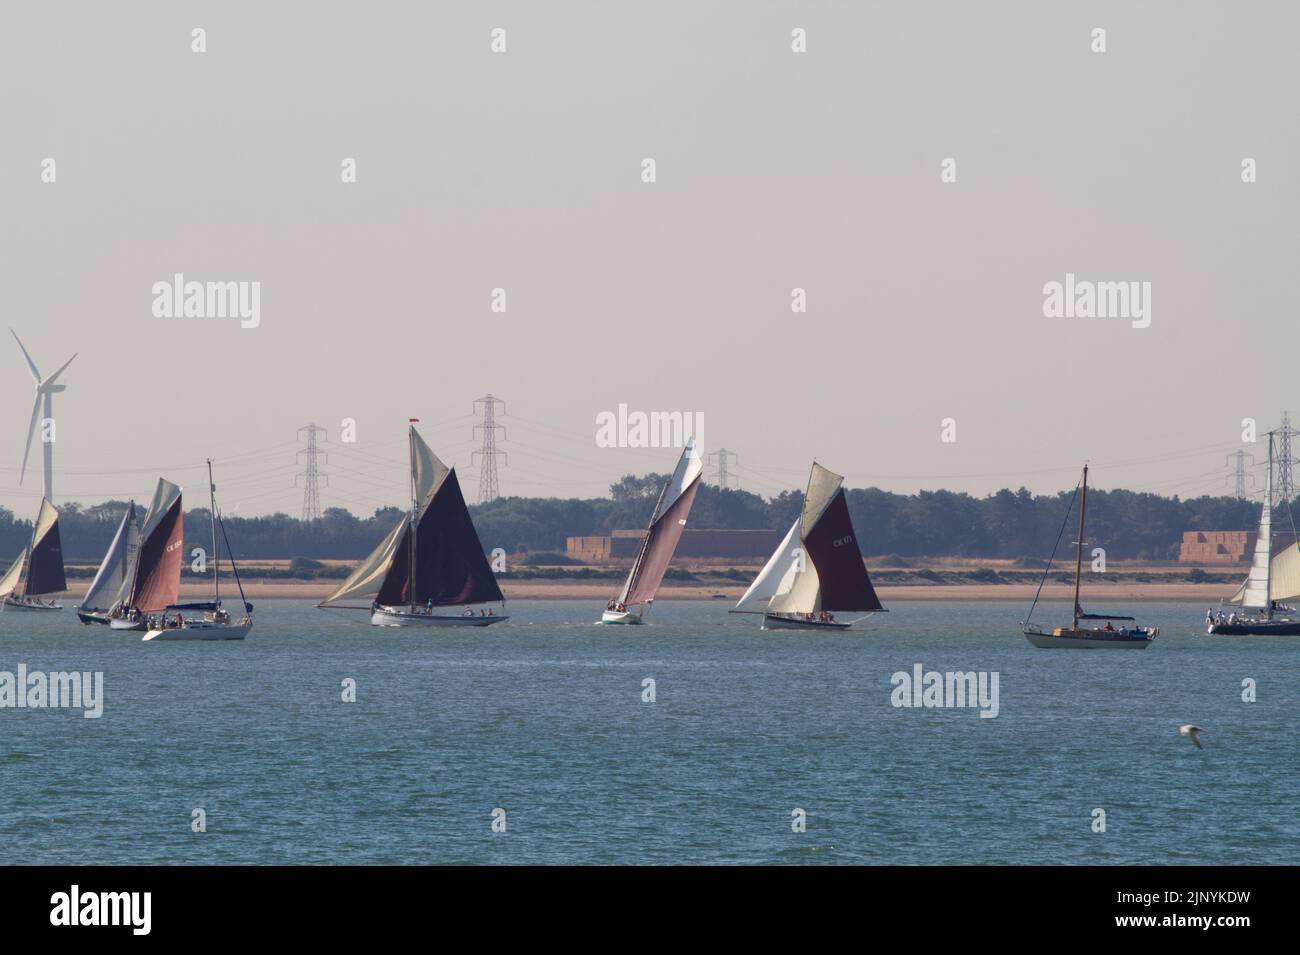 West Mersea regatta on Mersea Island in Essex. The regatta has been run almost continually since 1838 and is organised by volunteers. Sailing boats. Stock Photo